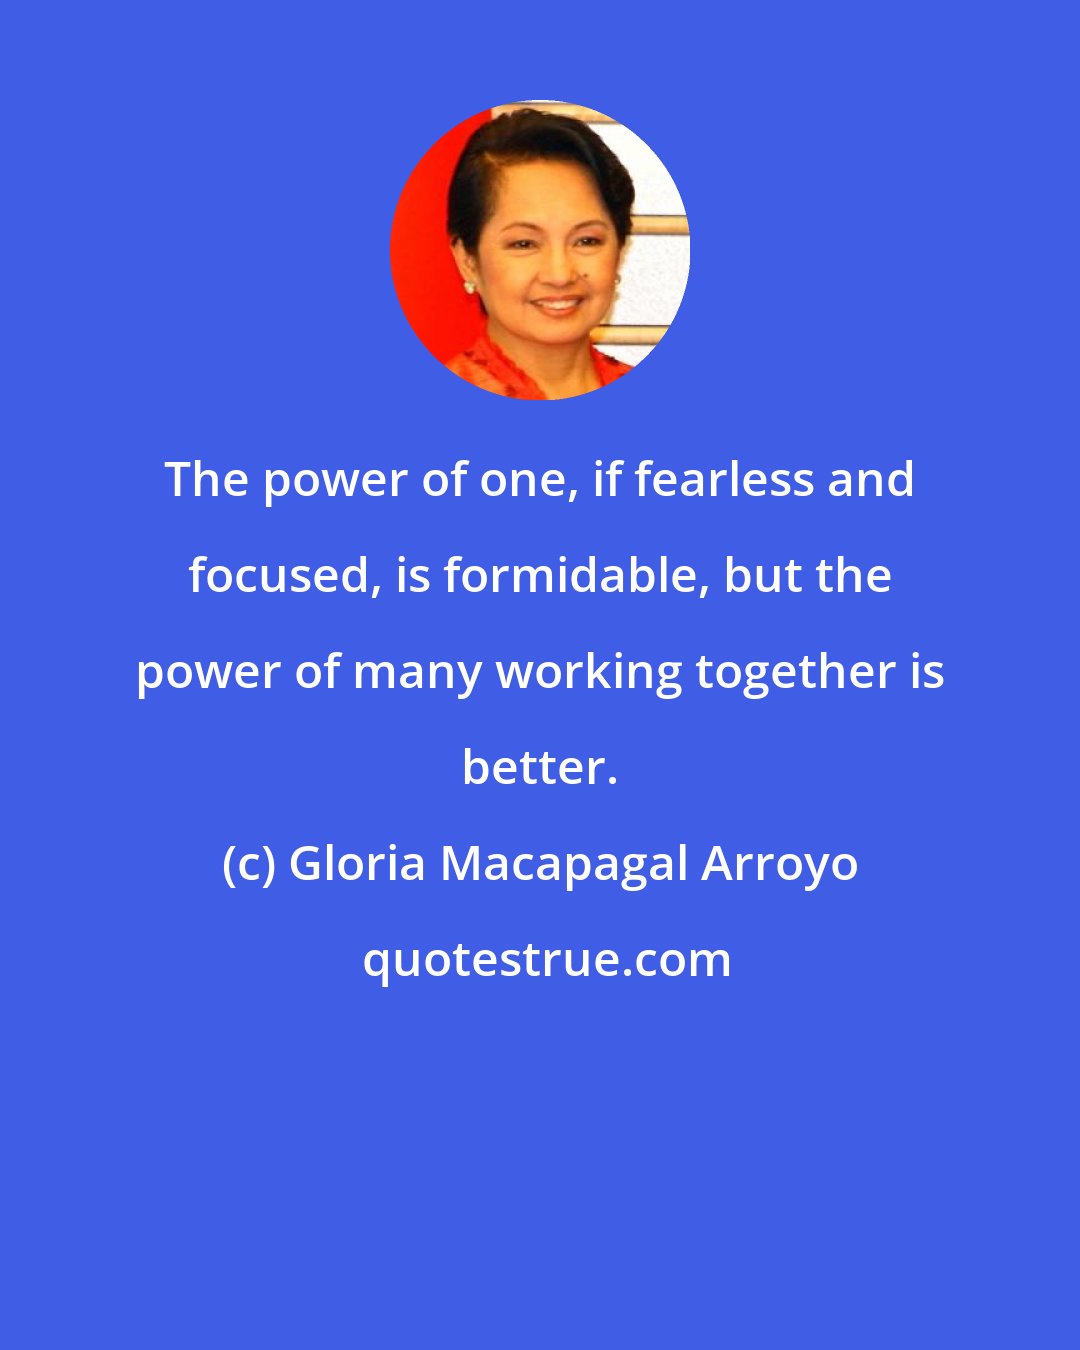 Gloria Macapagal Arroyo: The power of one, if fearless and focused, is formidable, but the power of many working together is better.